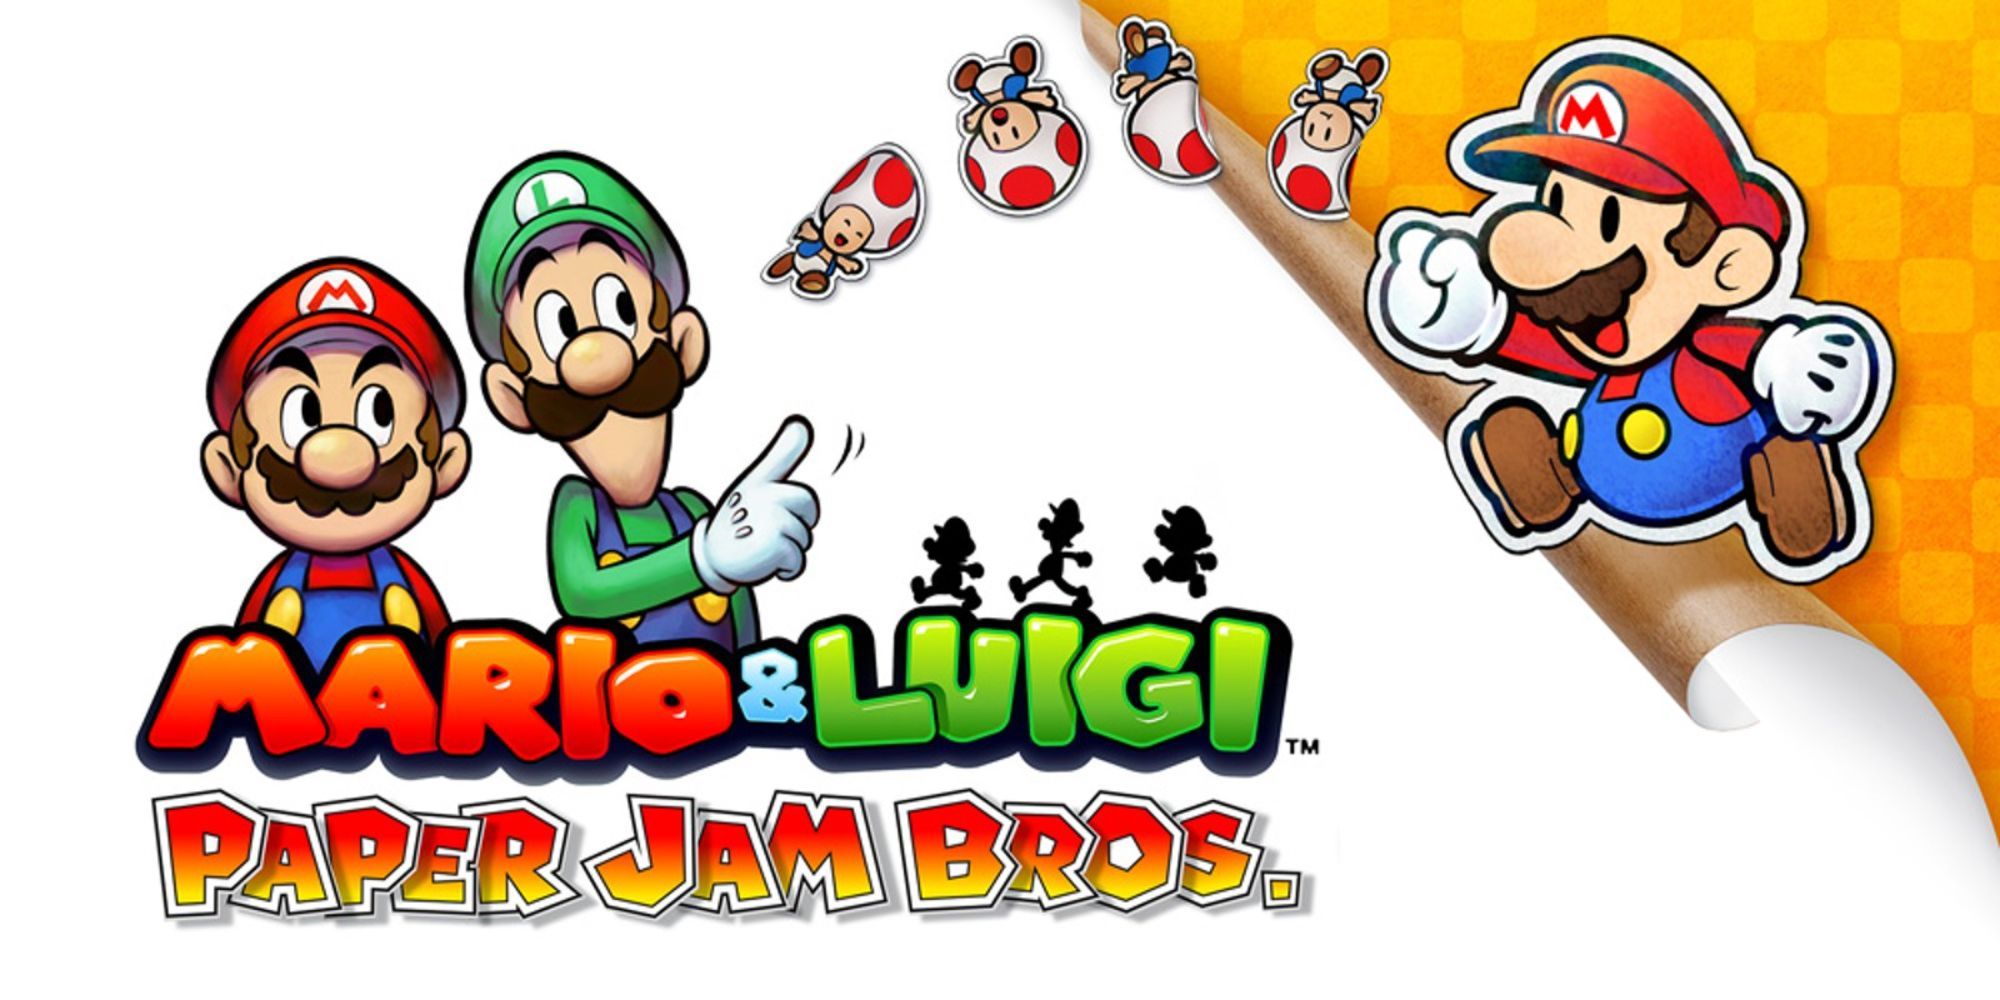 Mario stands next to Luigi pointing at several frogs in promotional art for Mario & Luigi Paper Jam